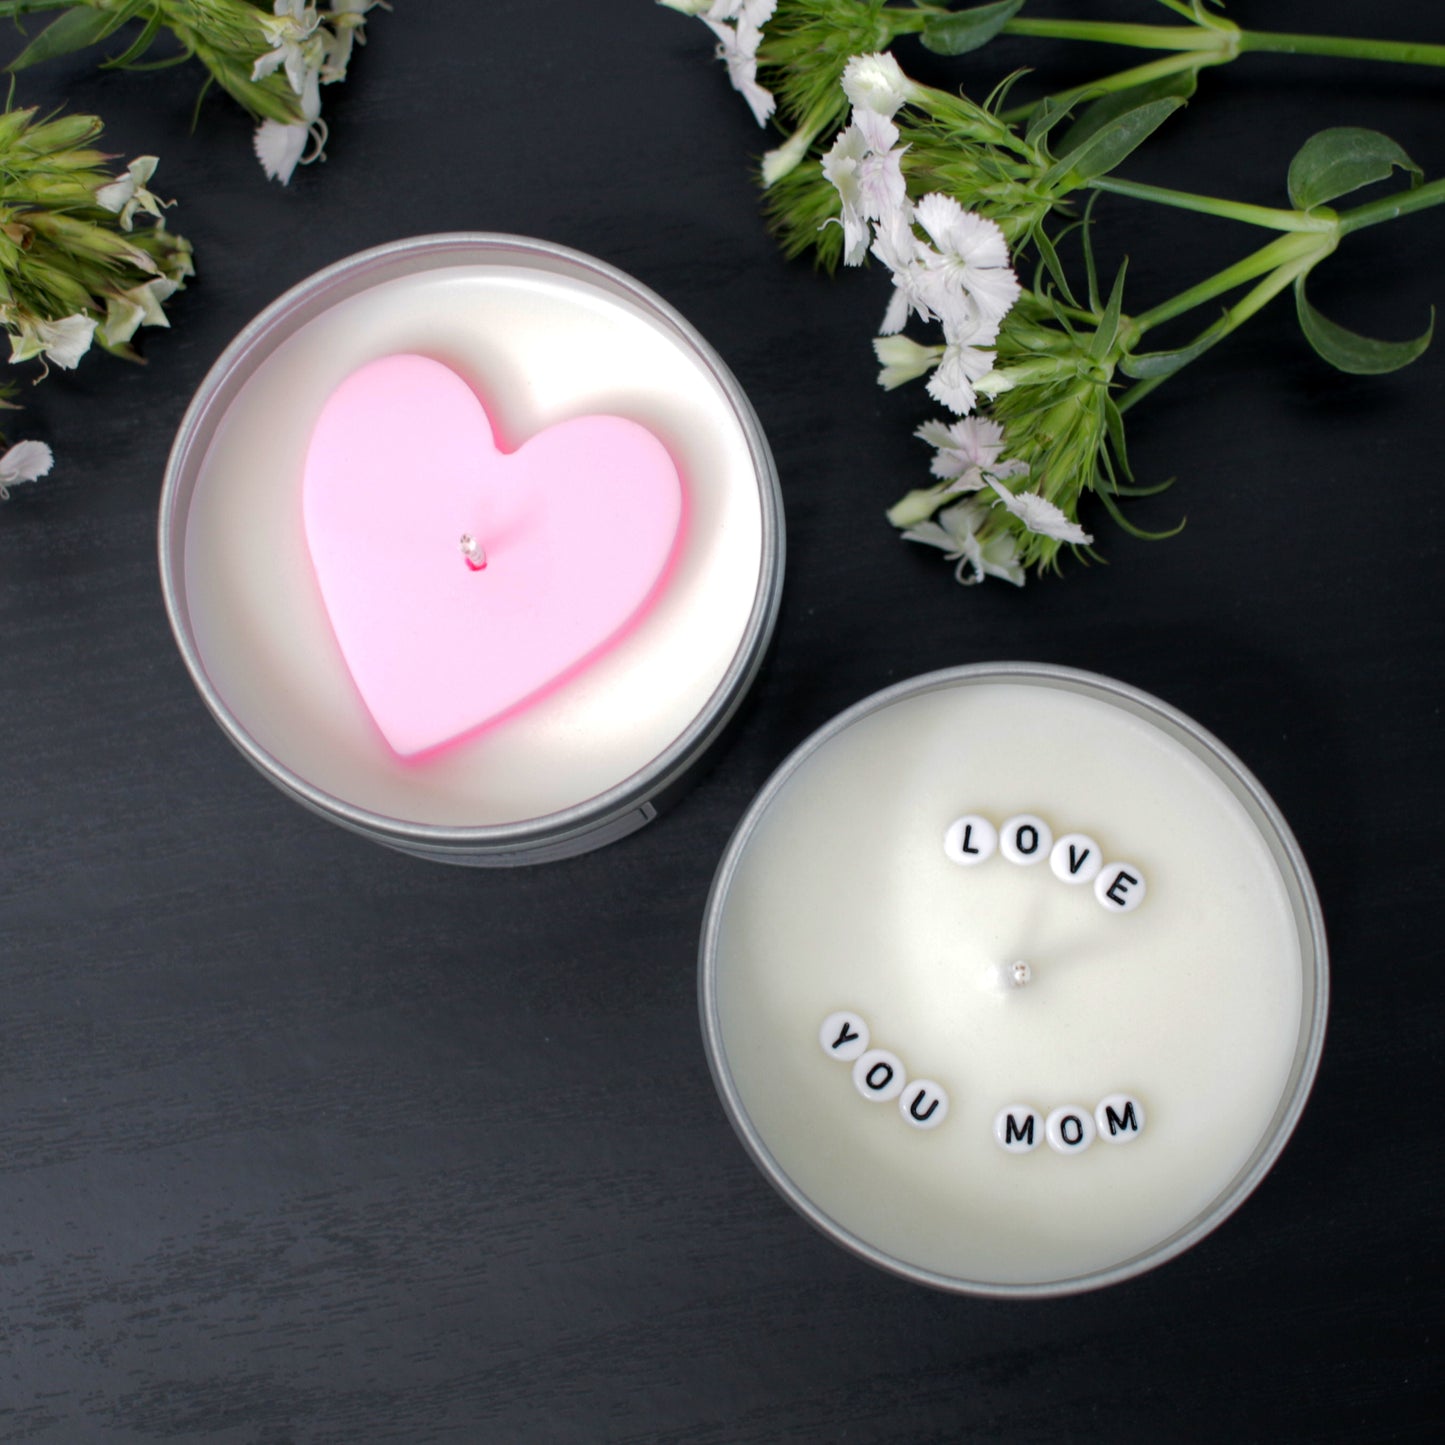 LOVE YOU MOM CANDLE